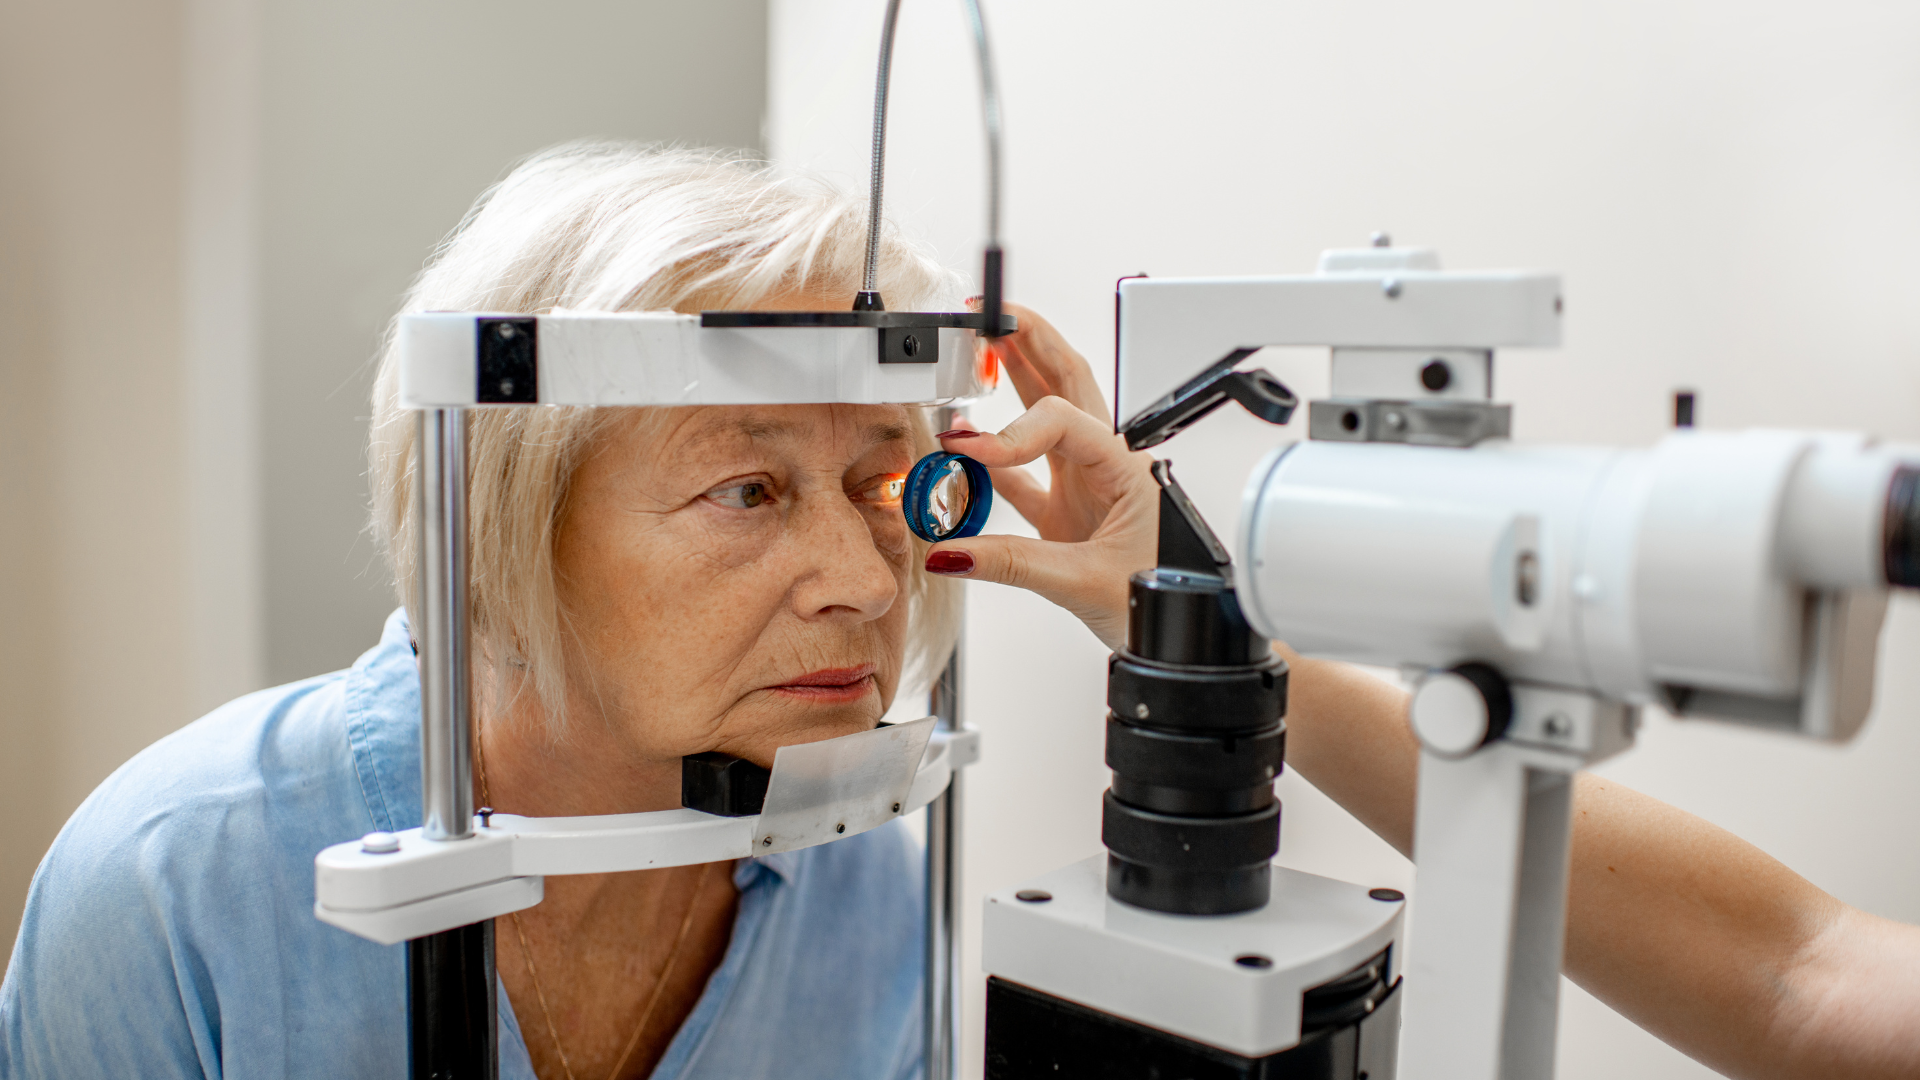 Retina Could Be Key to Detecting, Slowing Alzheimer’s